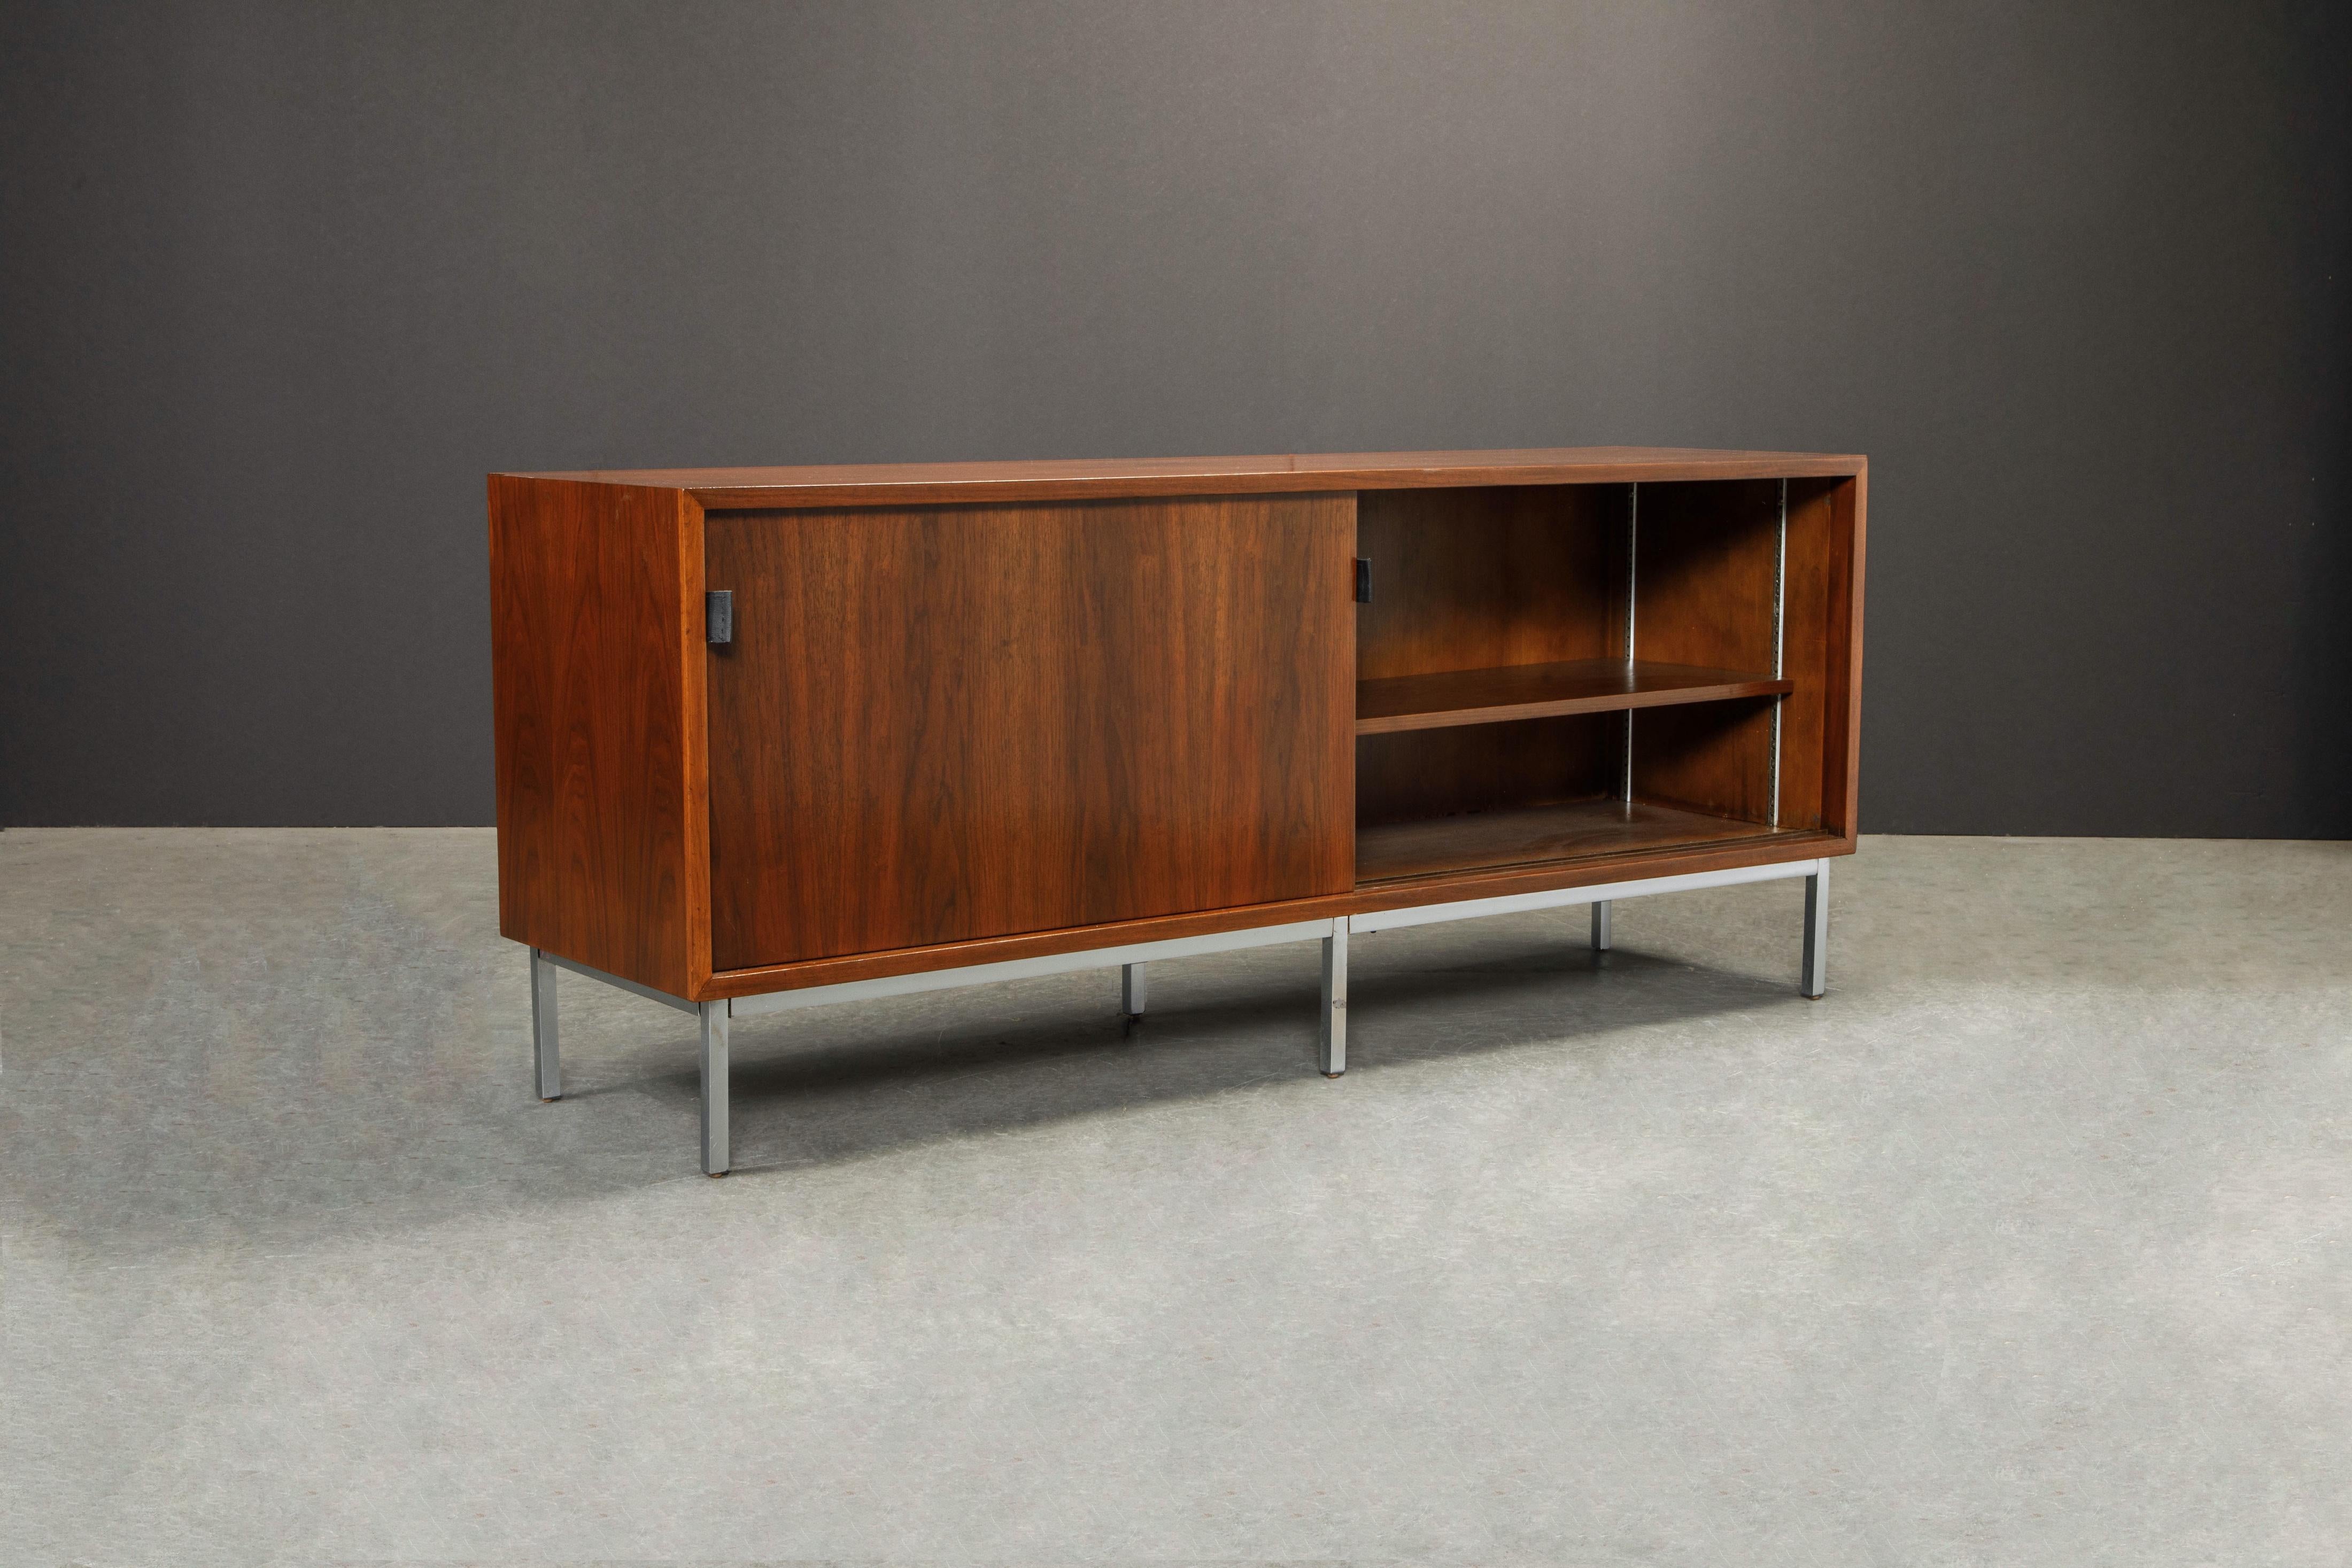 Late 20th Century Refinished Walnut Florence Knoll Credenza for Knoll Studio, Signed 